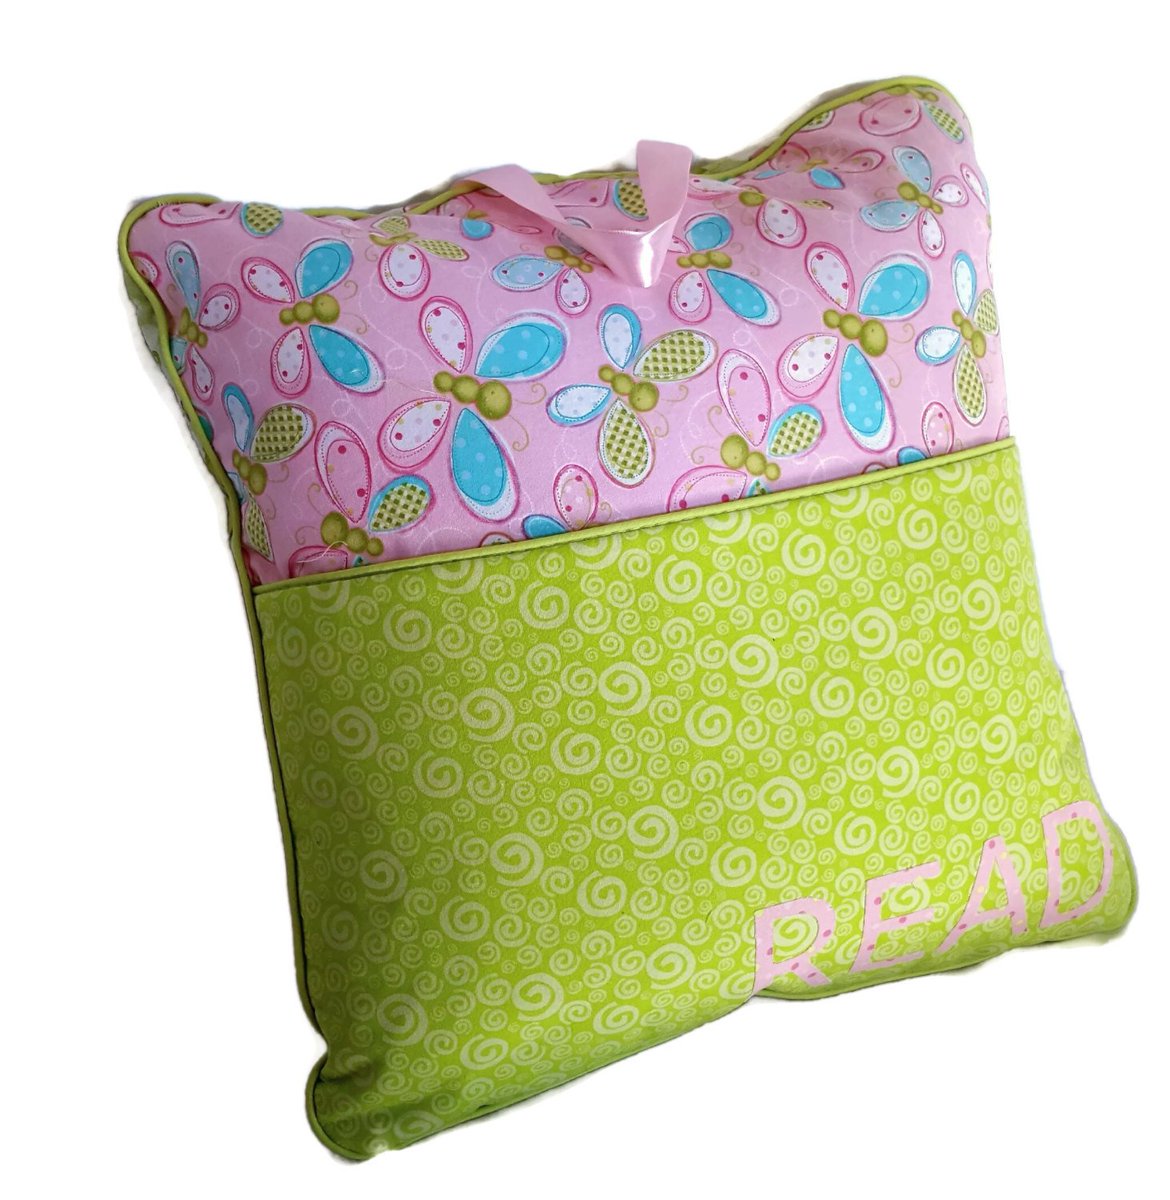 Child's On The Go Reading Pillow Cover - travel pillow… tuppu.net/35ad8f84 #ThePrimroseCottage #ButterflyPillow